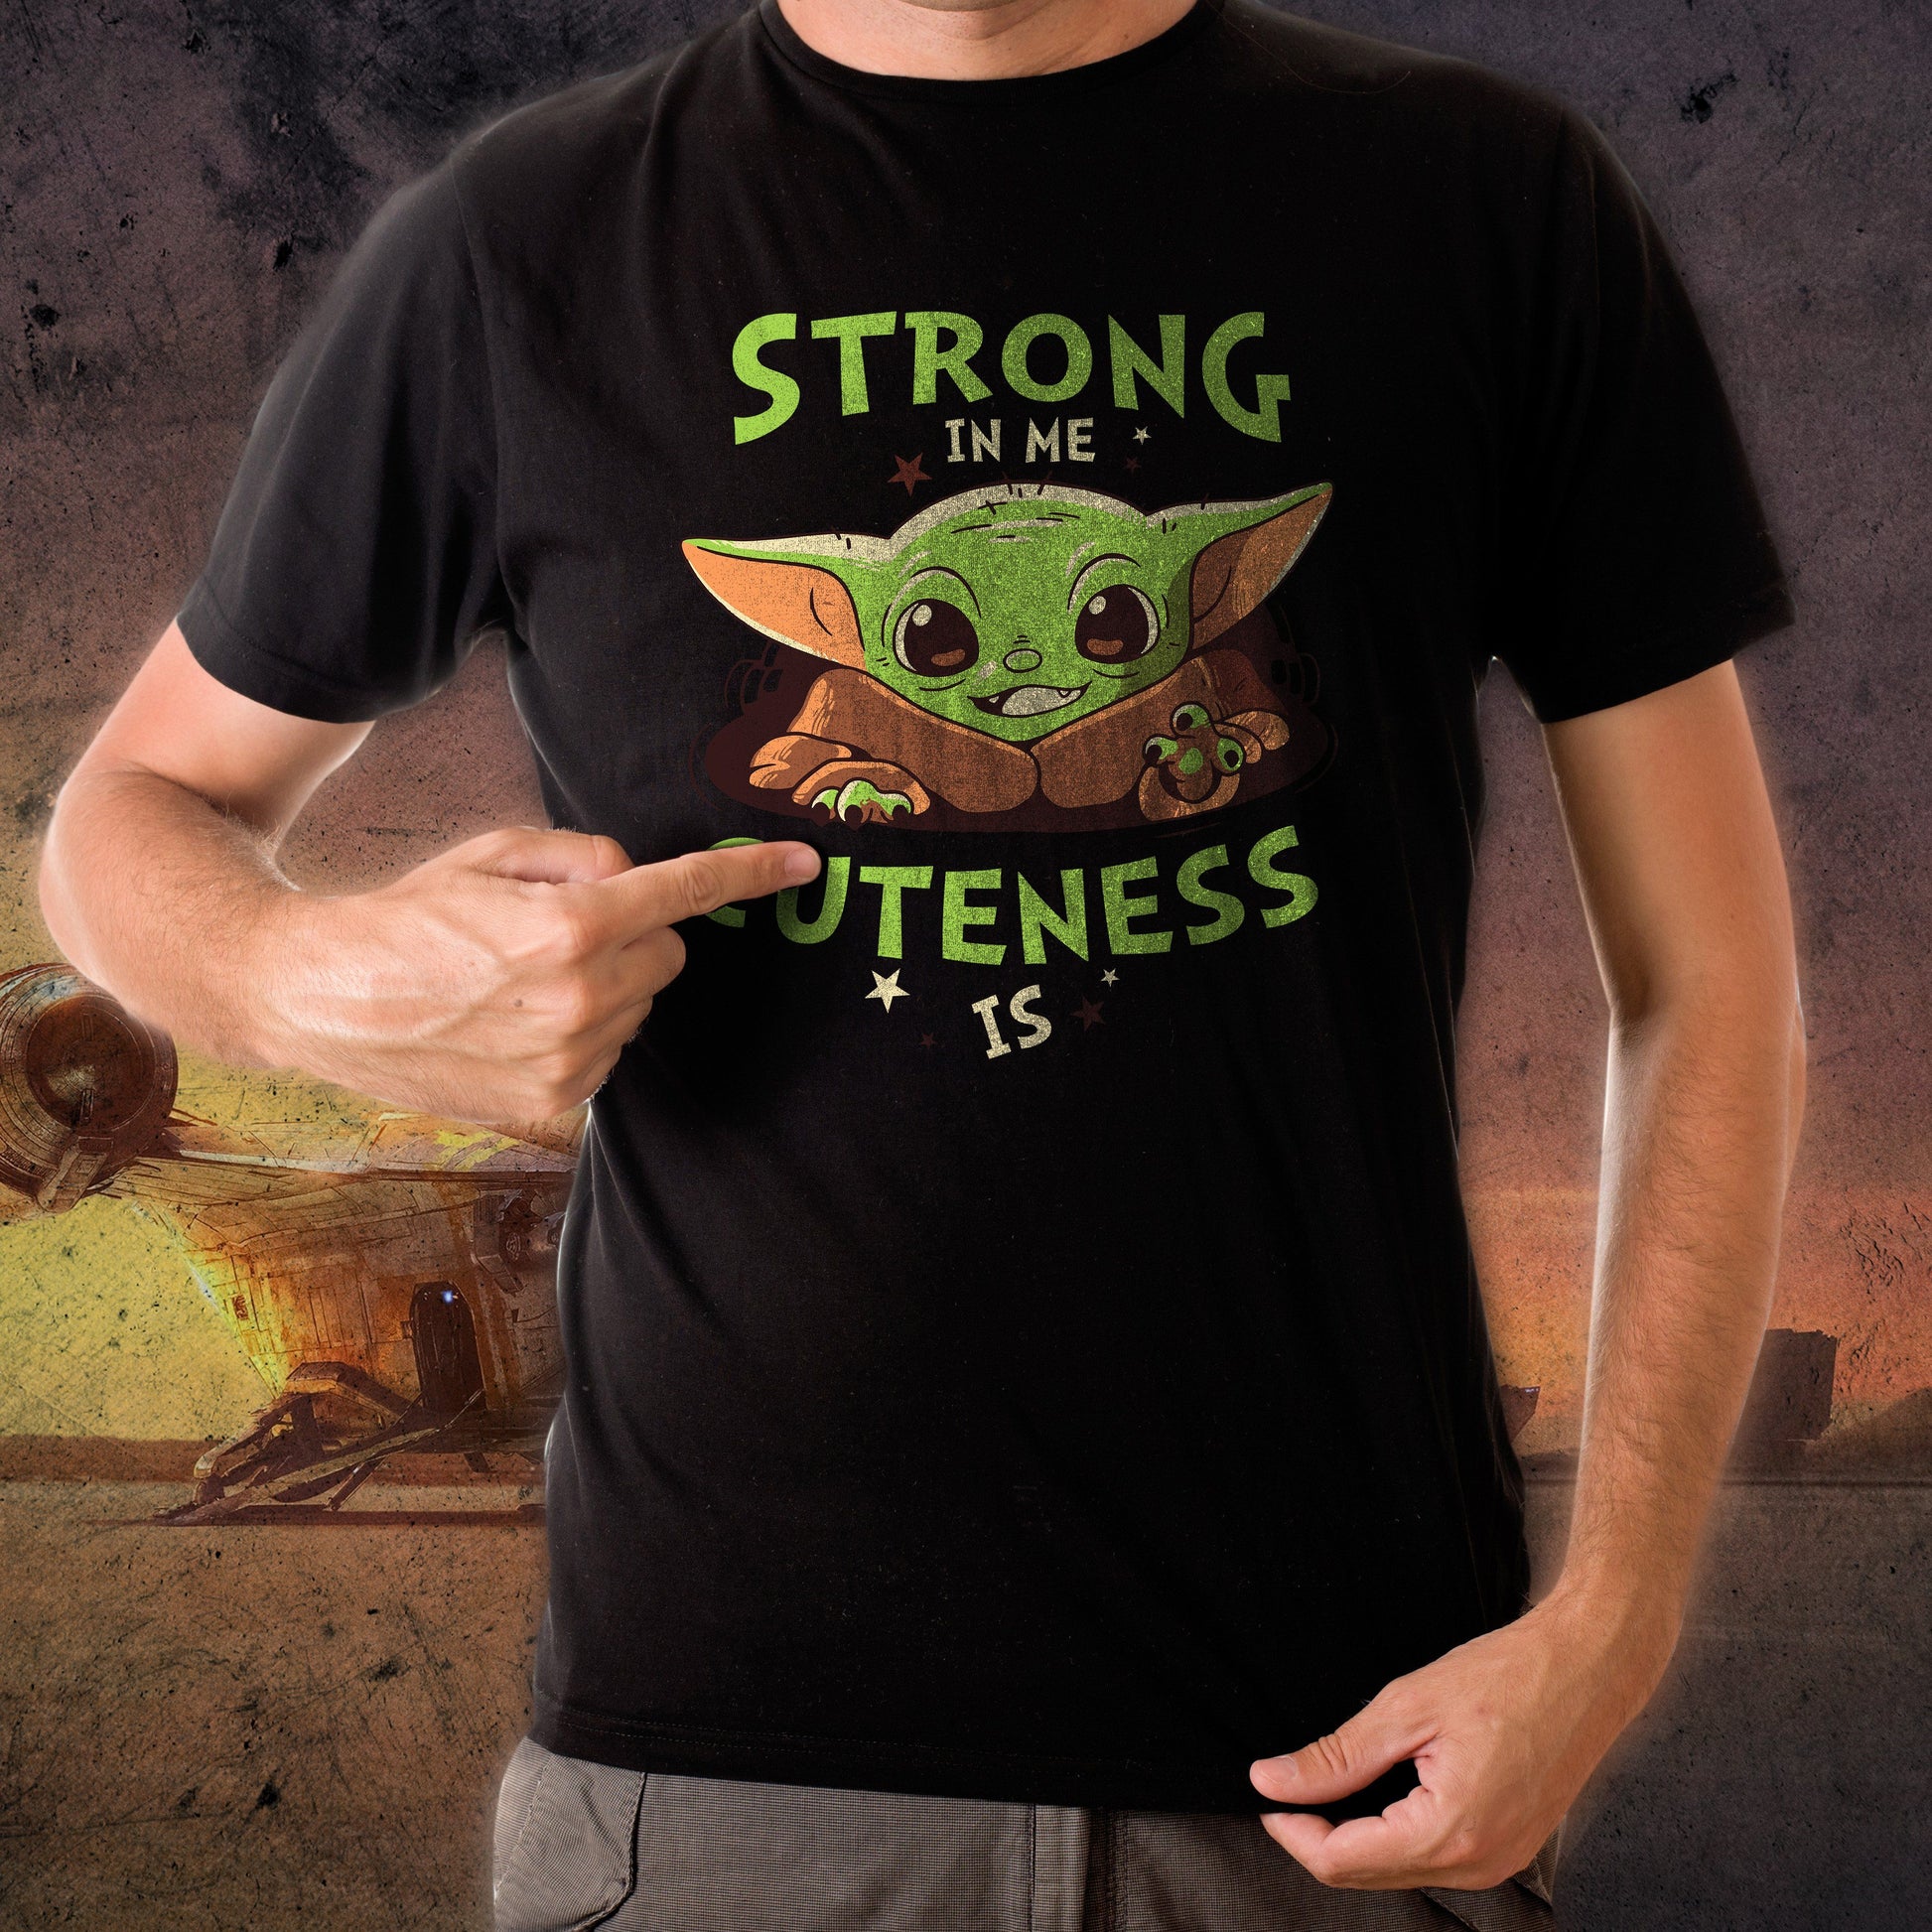 Black T-Shirt Baby Yoda - Strong in Me Cuteness is - Choose ur Color CucShop